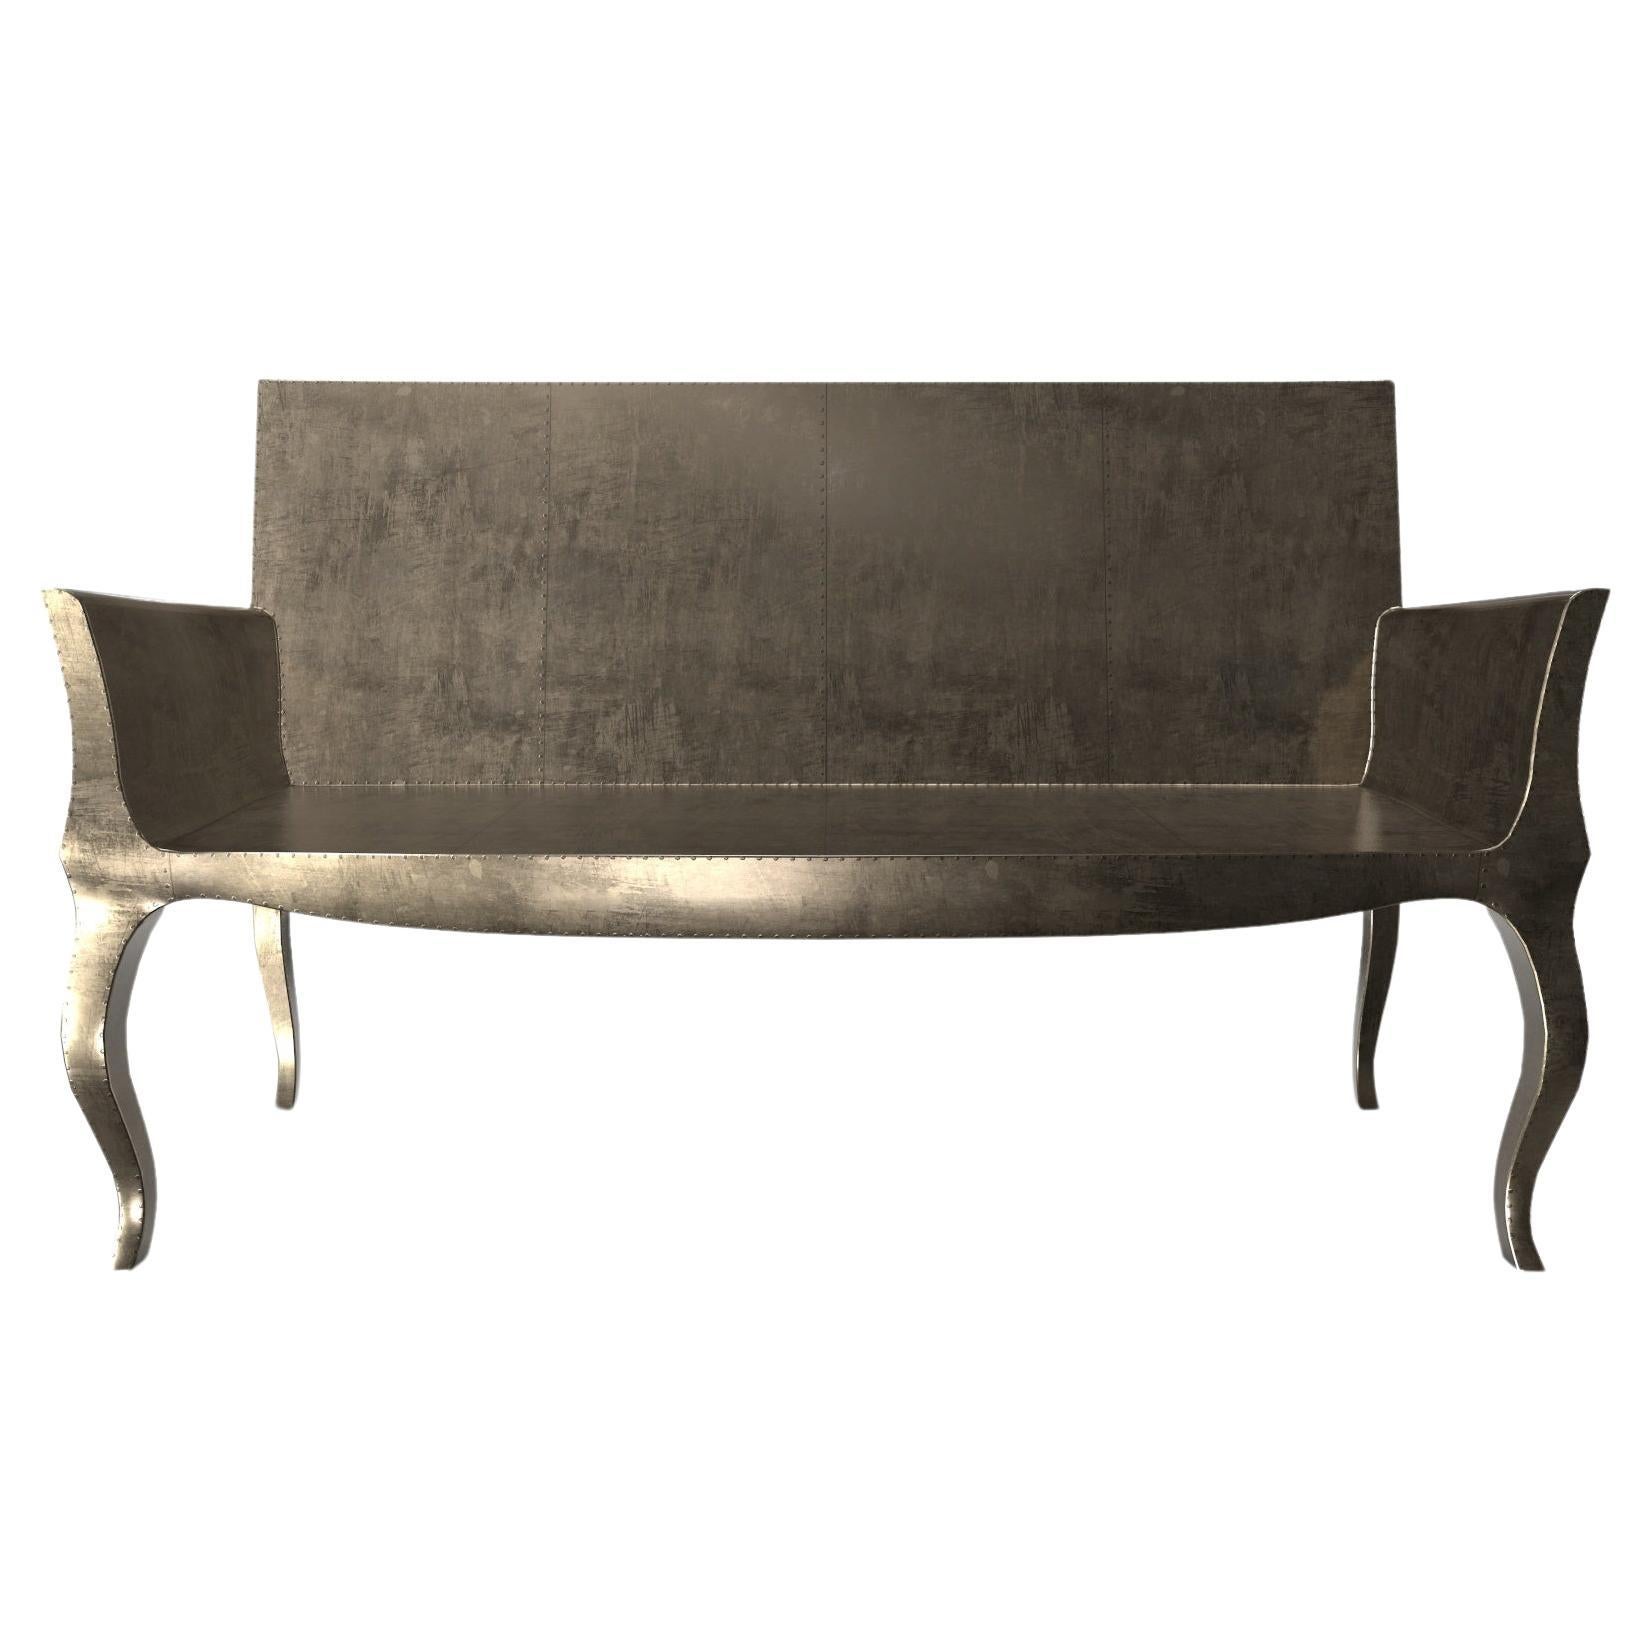 Louise Settee Art Deco Benches in Smooth Antique Bronze by Paul Mathieu For Sale